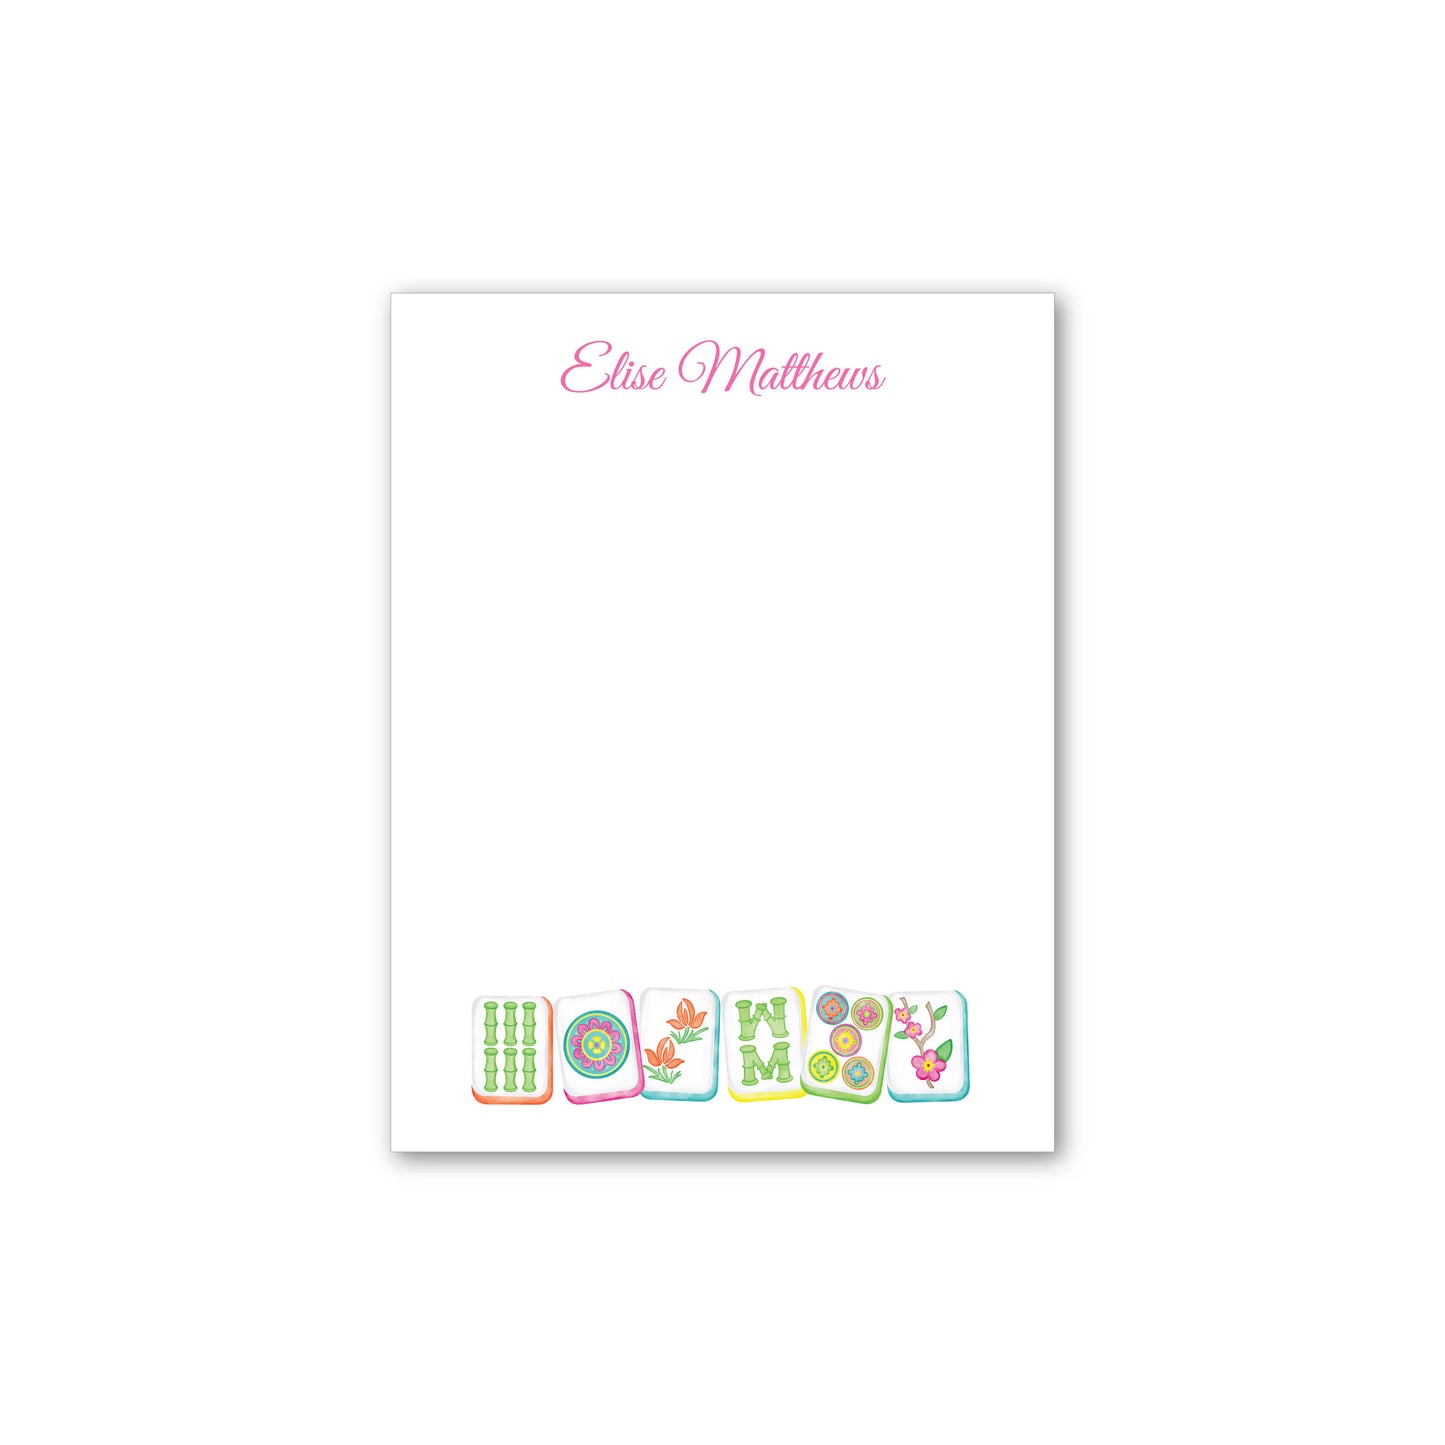 Personalized Notepad   |   Whimsy Tiles  |   Mah Jongg